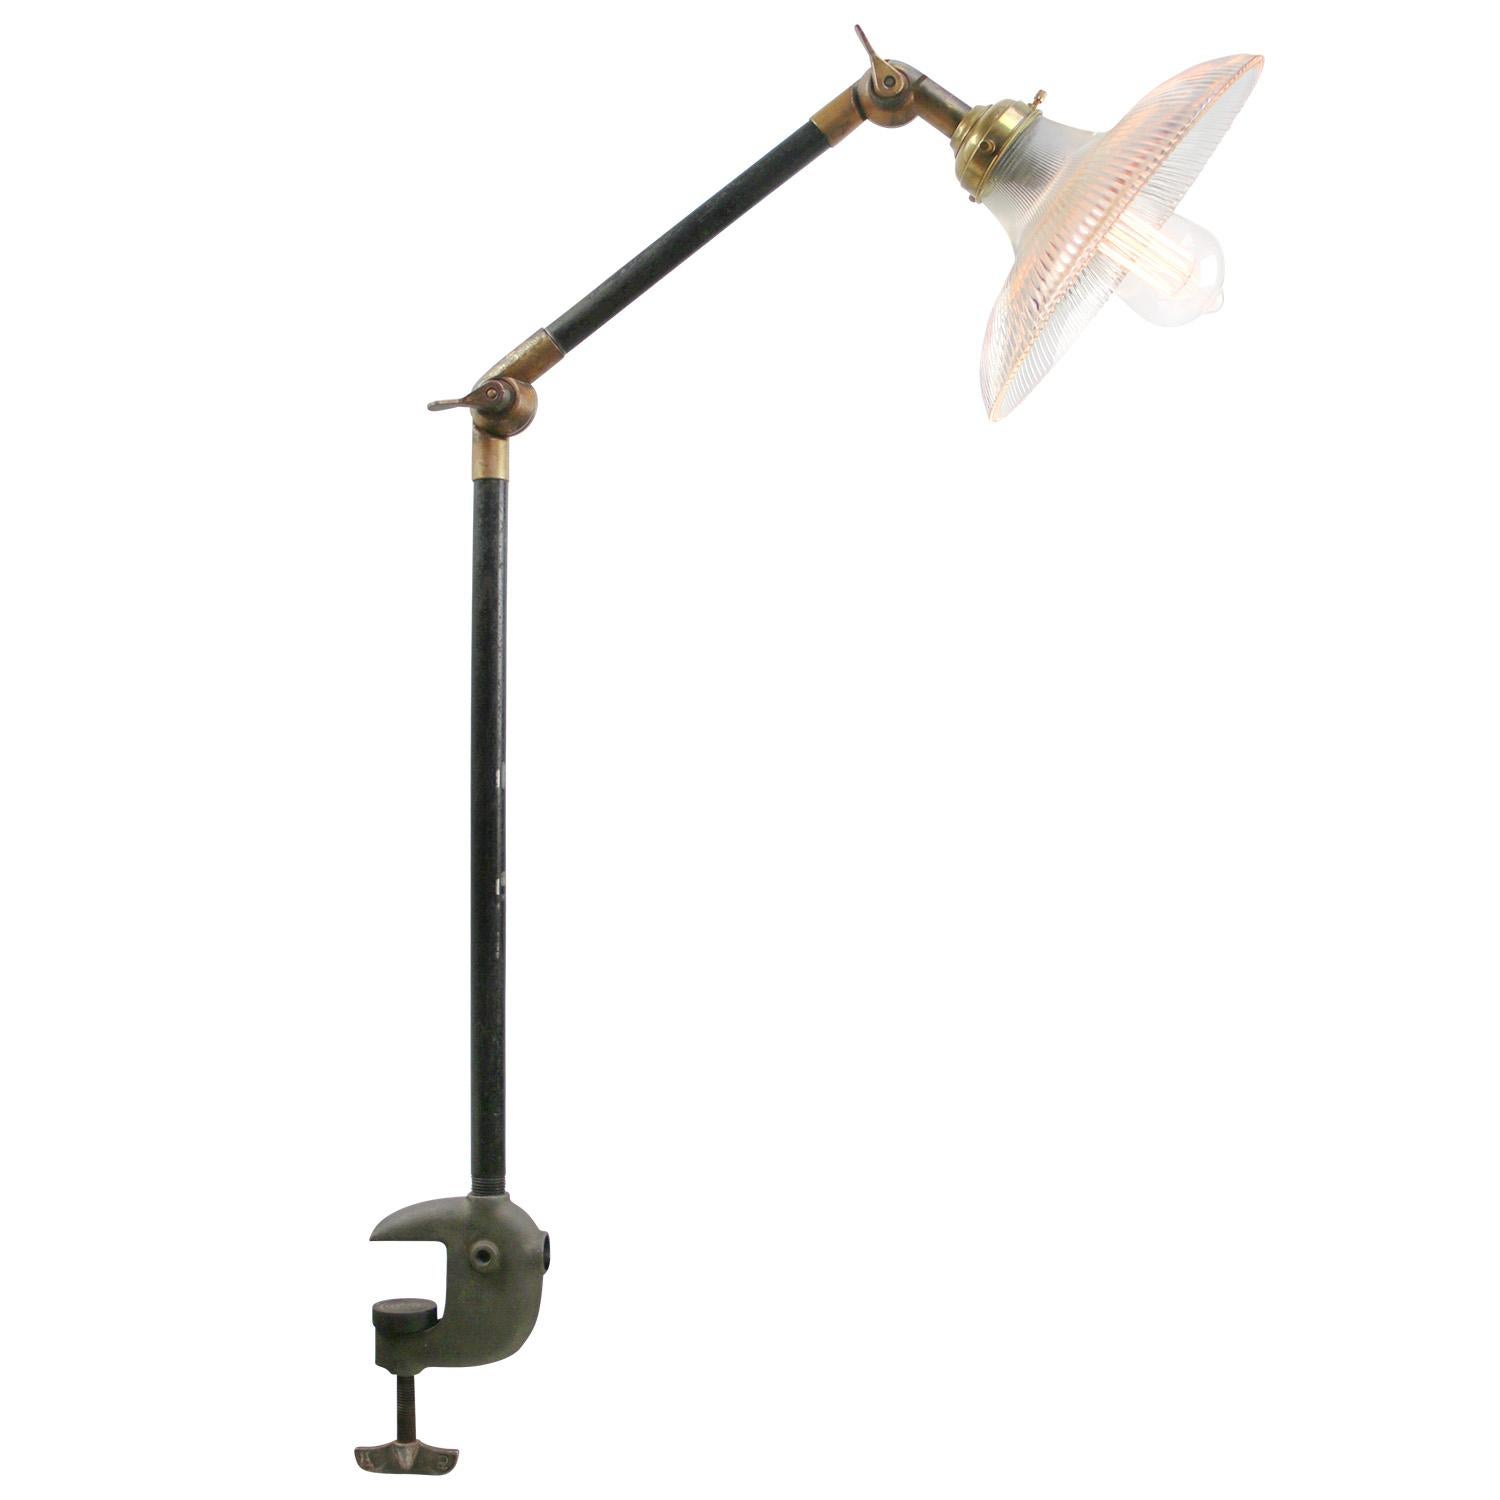 French Holophane Glass Vintage industrial 2-arm machinist work table lamp
Cast iron clamp and arm. Brass joints.
Adjustable in height and angle.
Including plug and switch

Available with UK / US plug

Weight: 3.30 kg / 7.3 lb

Priced per individual